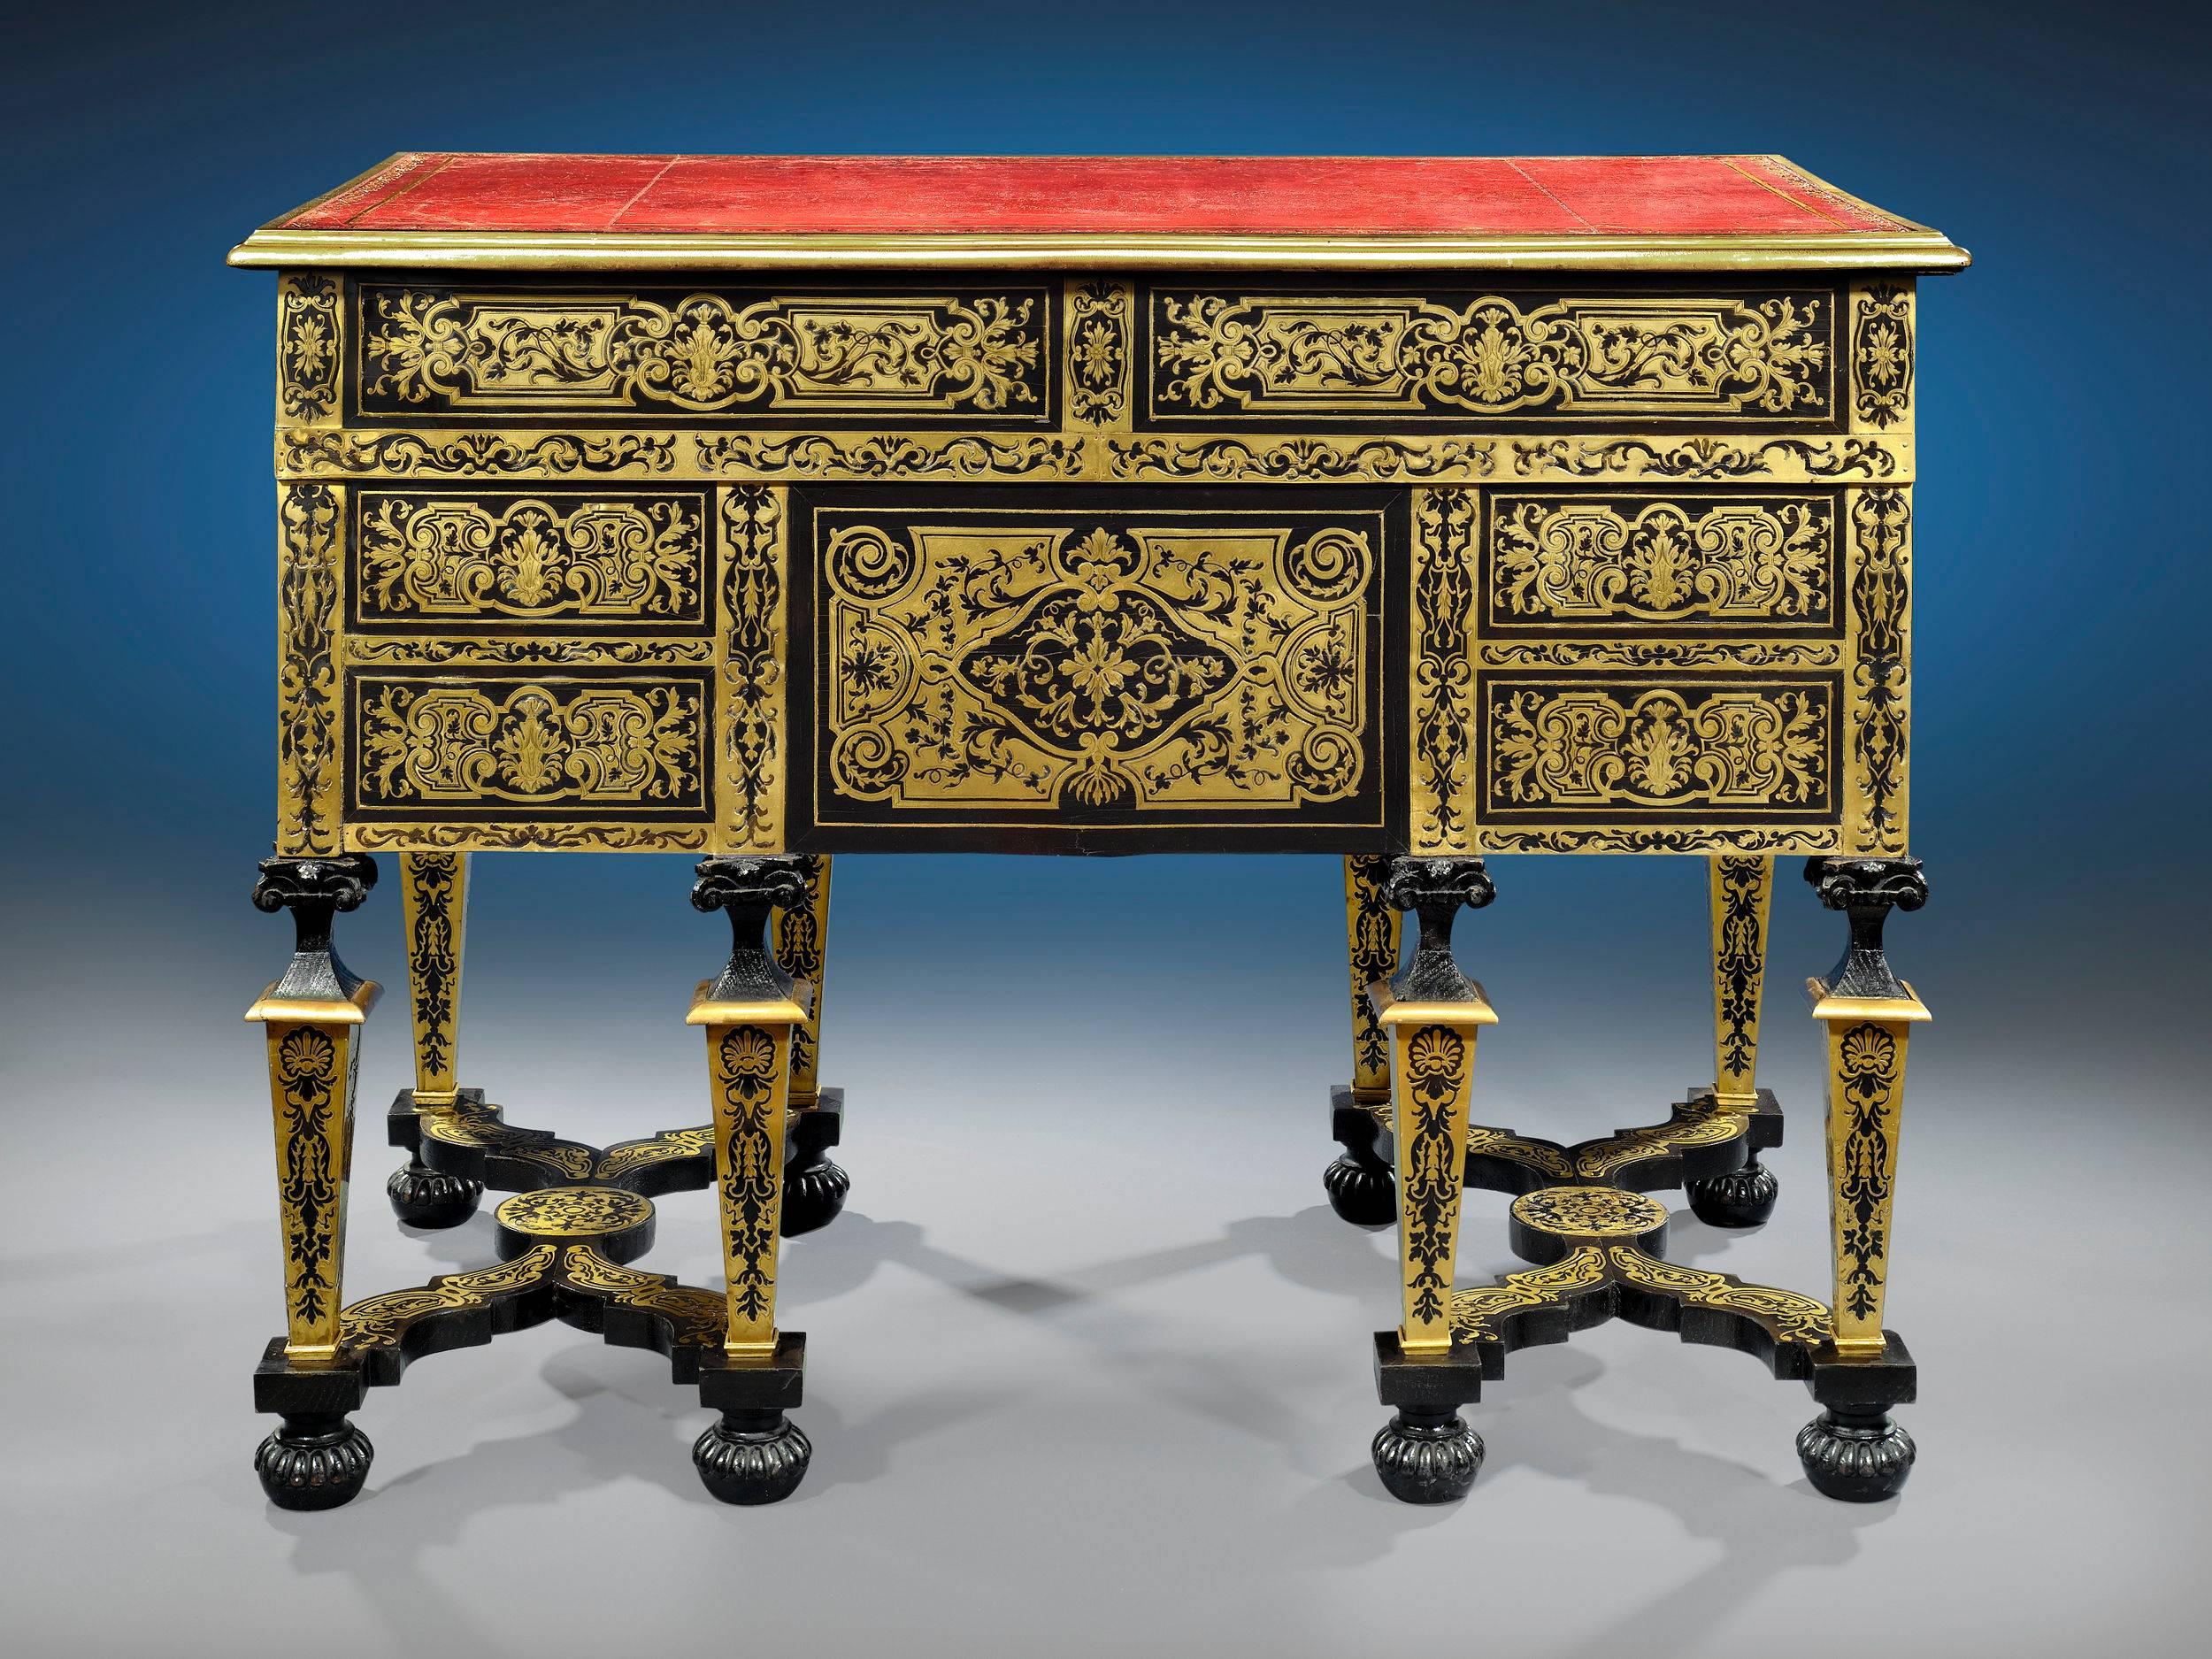 This wonderful French desk is decorated in the exquisite tortoiseshell-and-bronze inlay style perfected by celebrated ebeniste André-Charles Boulle. Displaying some of the finest craftsmanship of the 19th century, this desk is a testament to